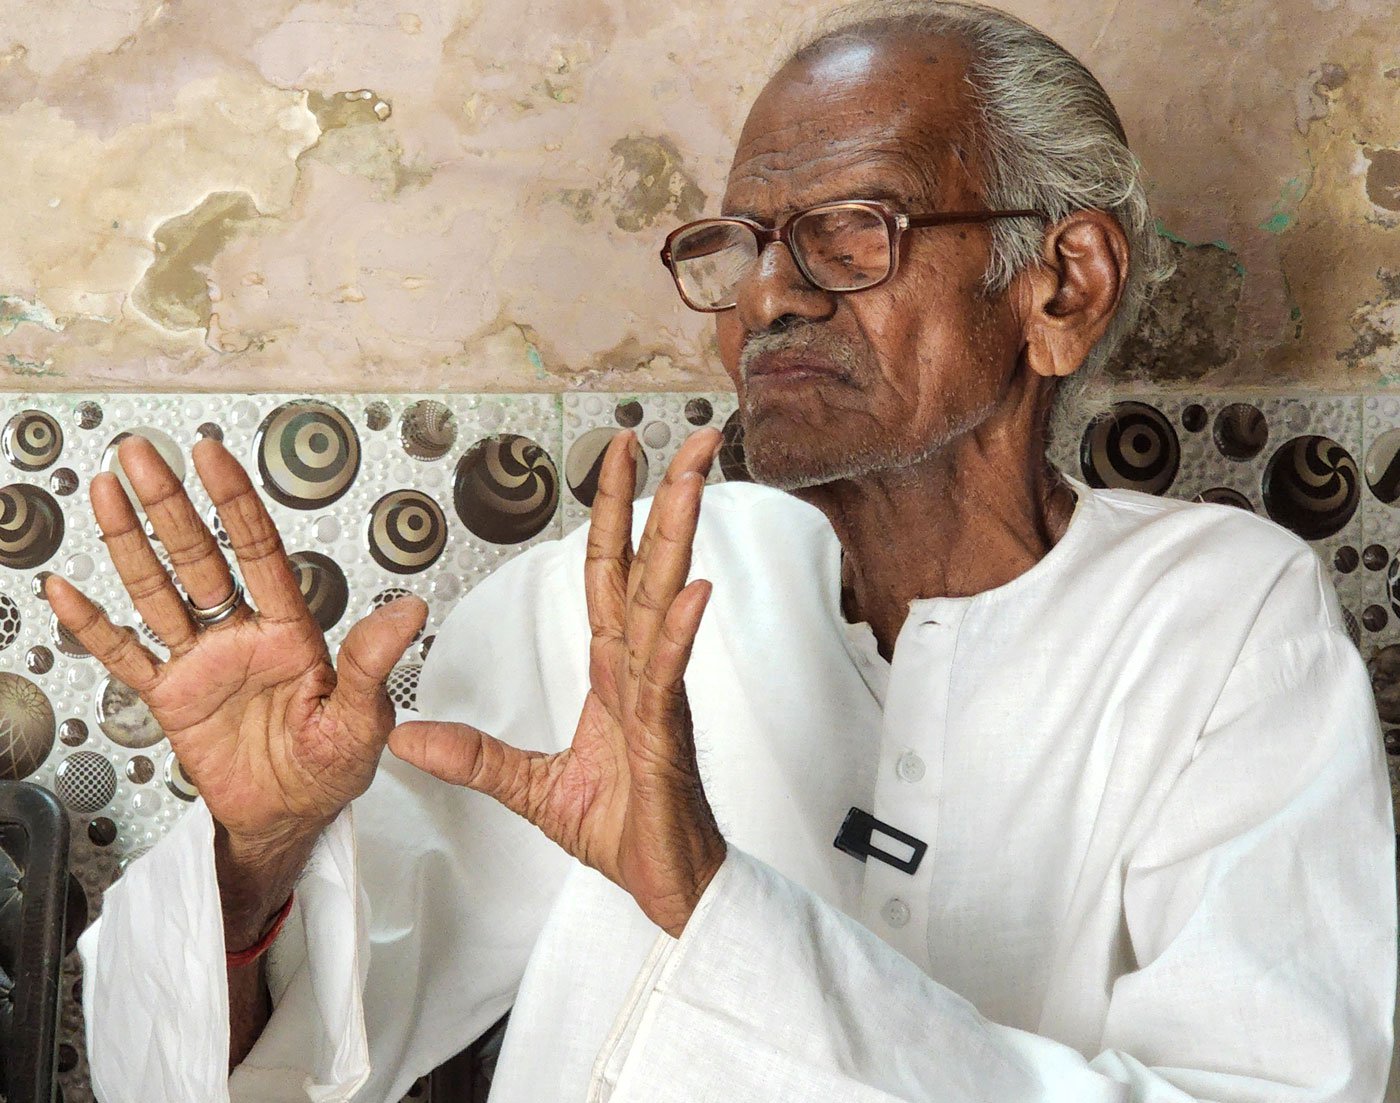 Shobharam Gehervar, the last Dalit freedom fighter in Rajasthan, talking to PARI at his home in Ajmer in 2022